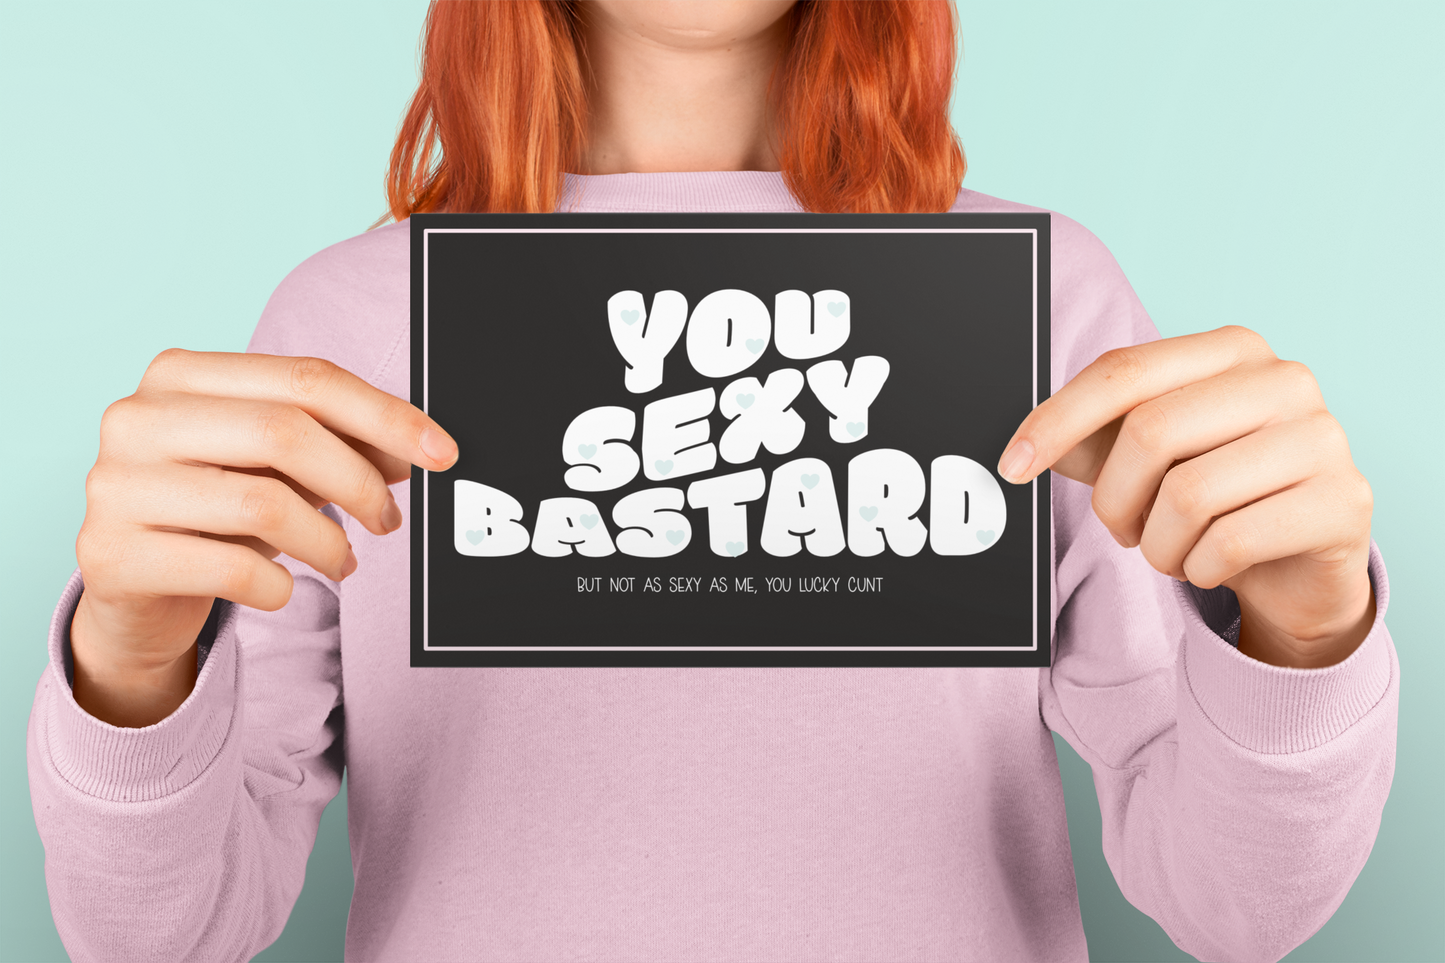 Black horizontal greetings card with a fun quote saying 'you sexy bastard' in a bold font. Underneath is a smaller font which reads 'but not as sexy as me, you lucky c*nt.